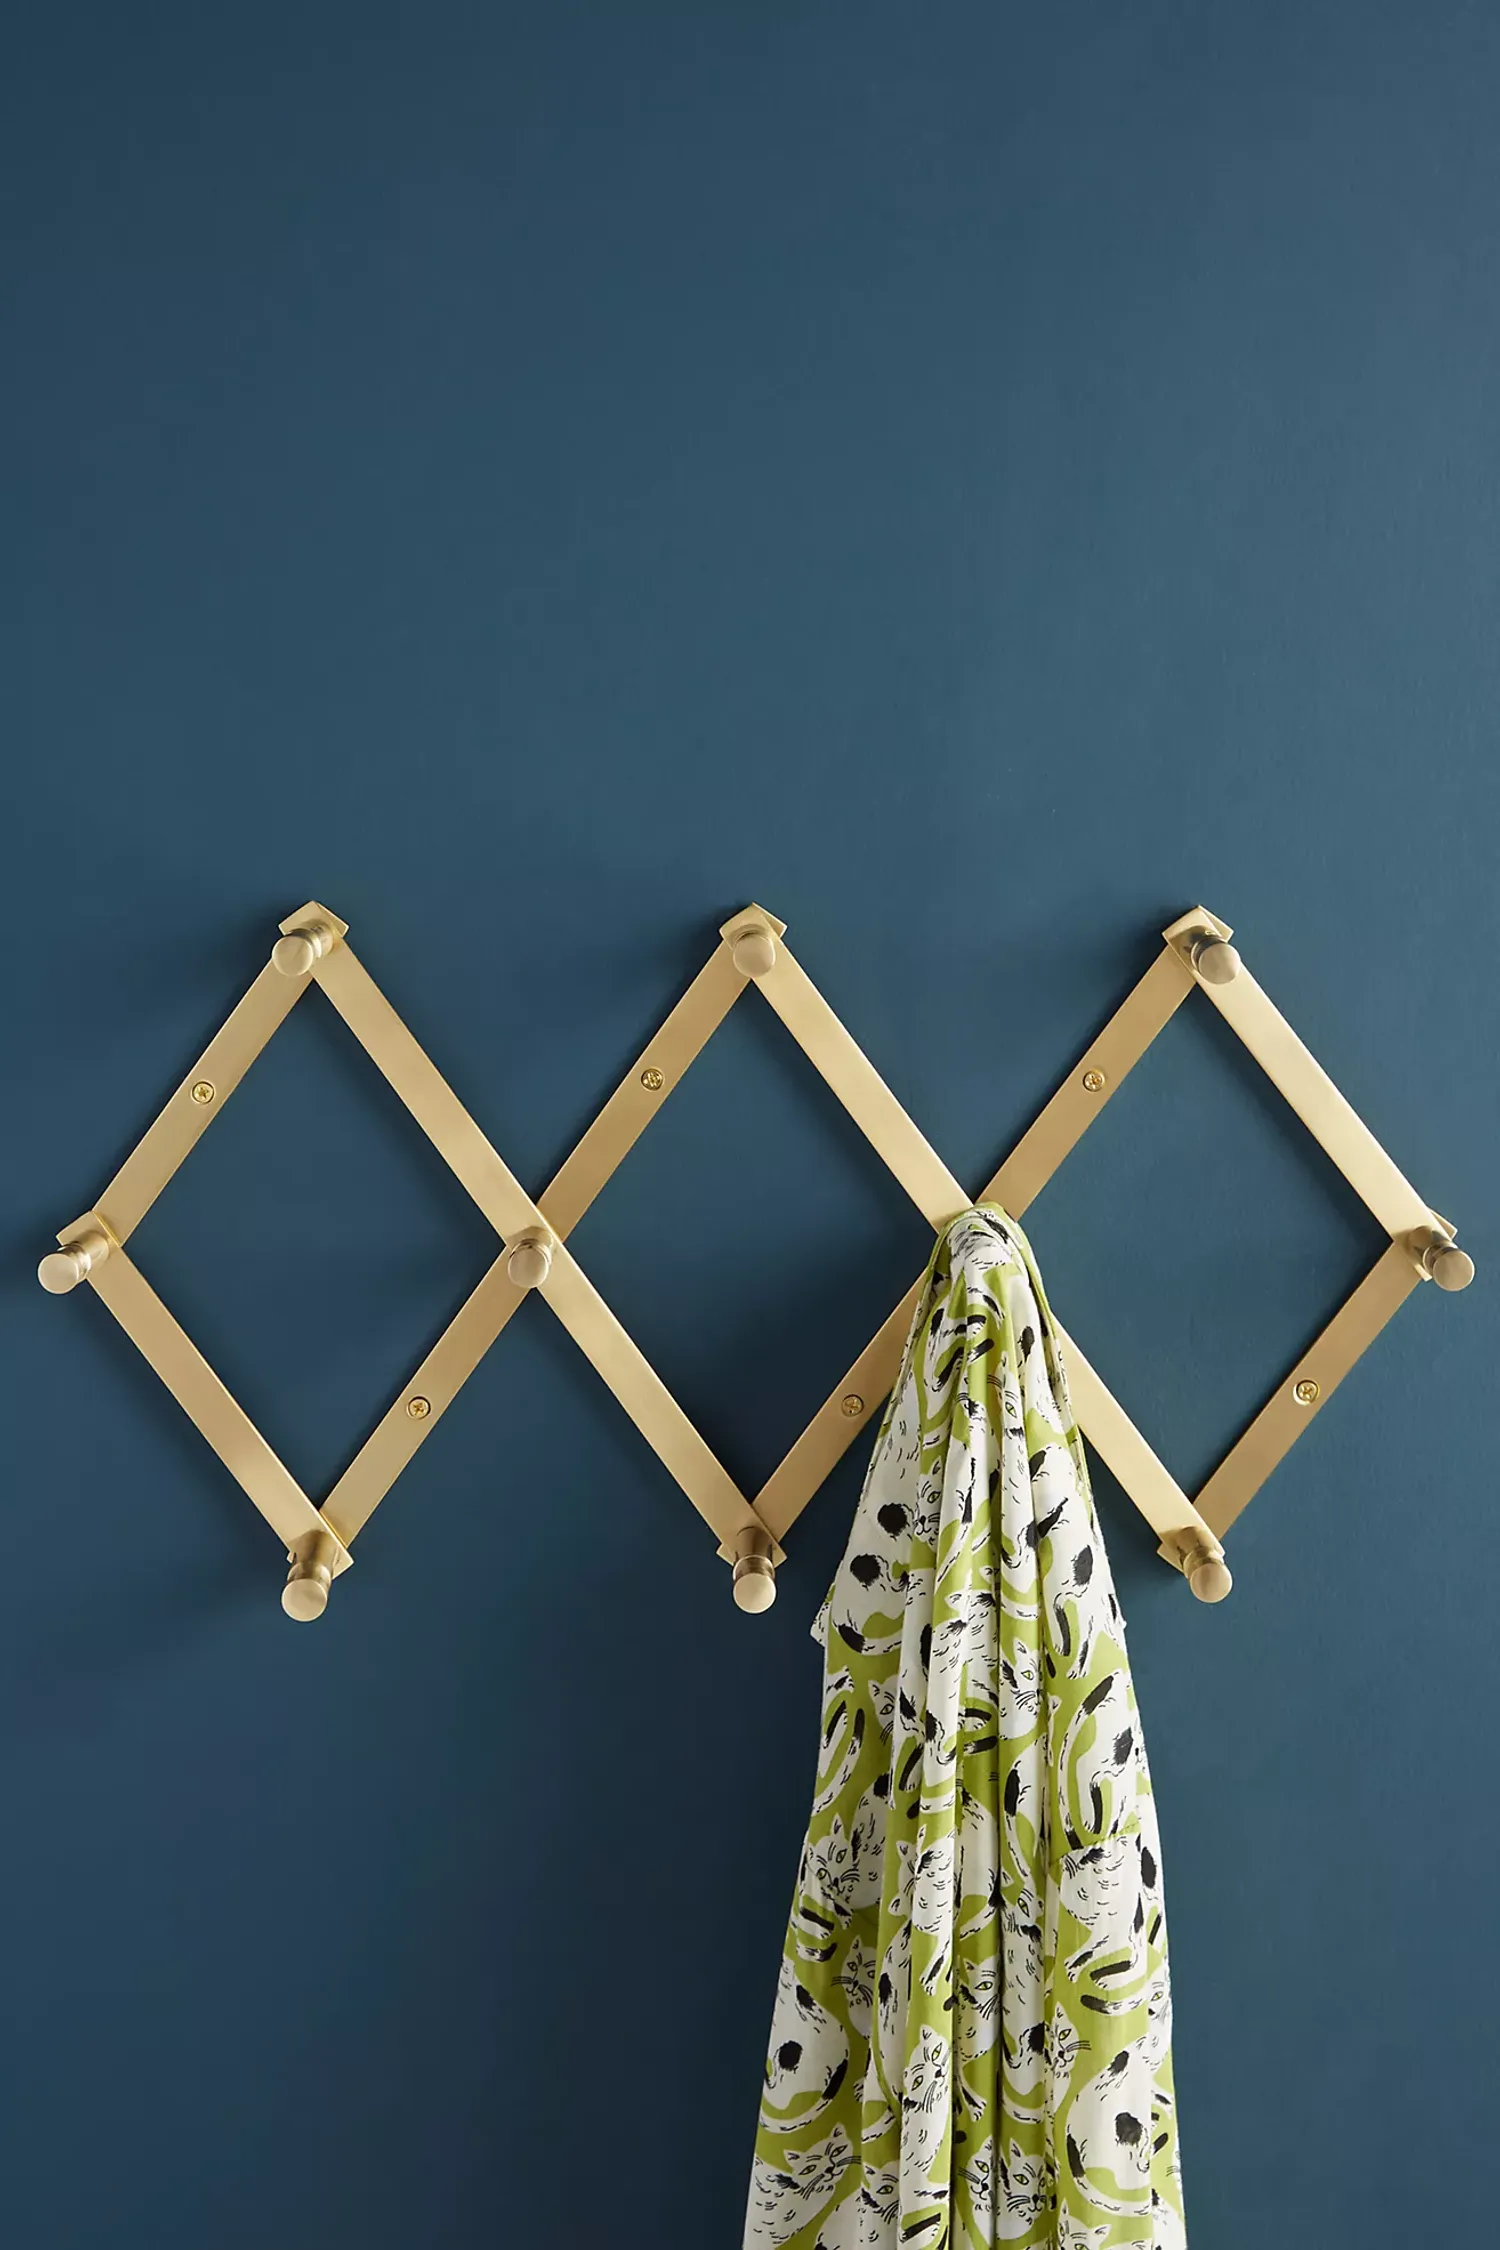 Shop Anthropologie Accordion Hook Rack, Brass from Anthropologie on Openhaus